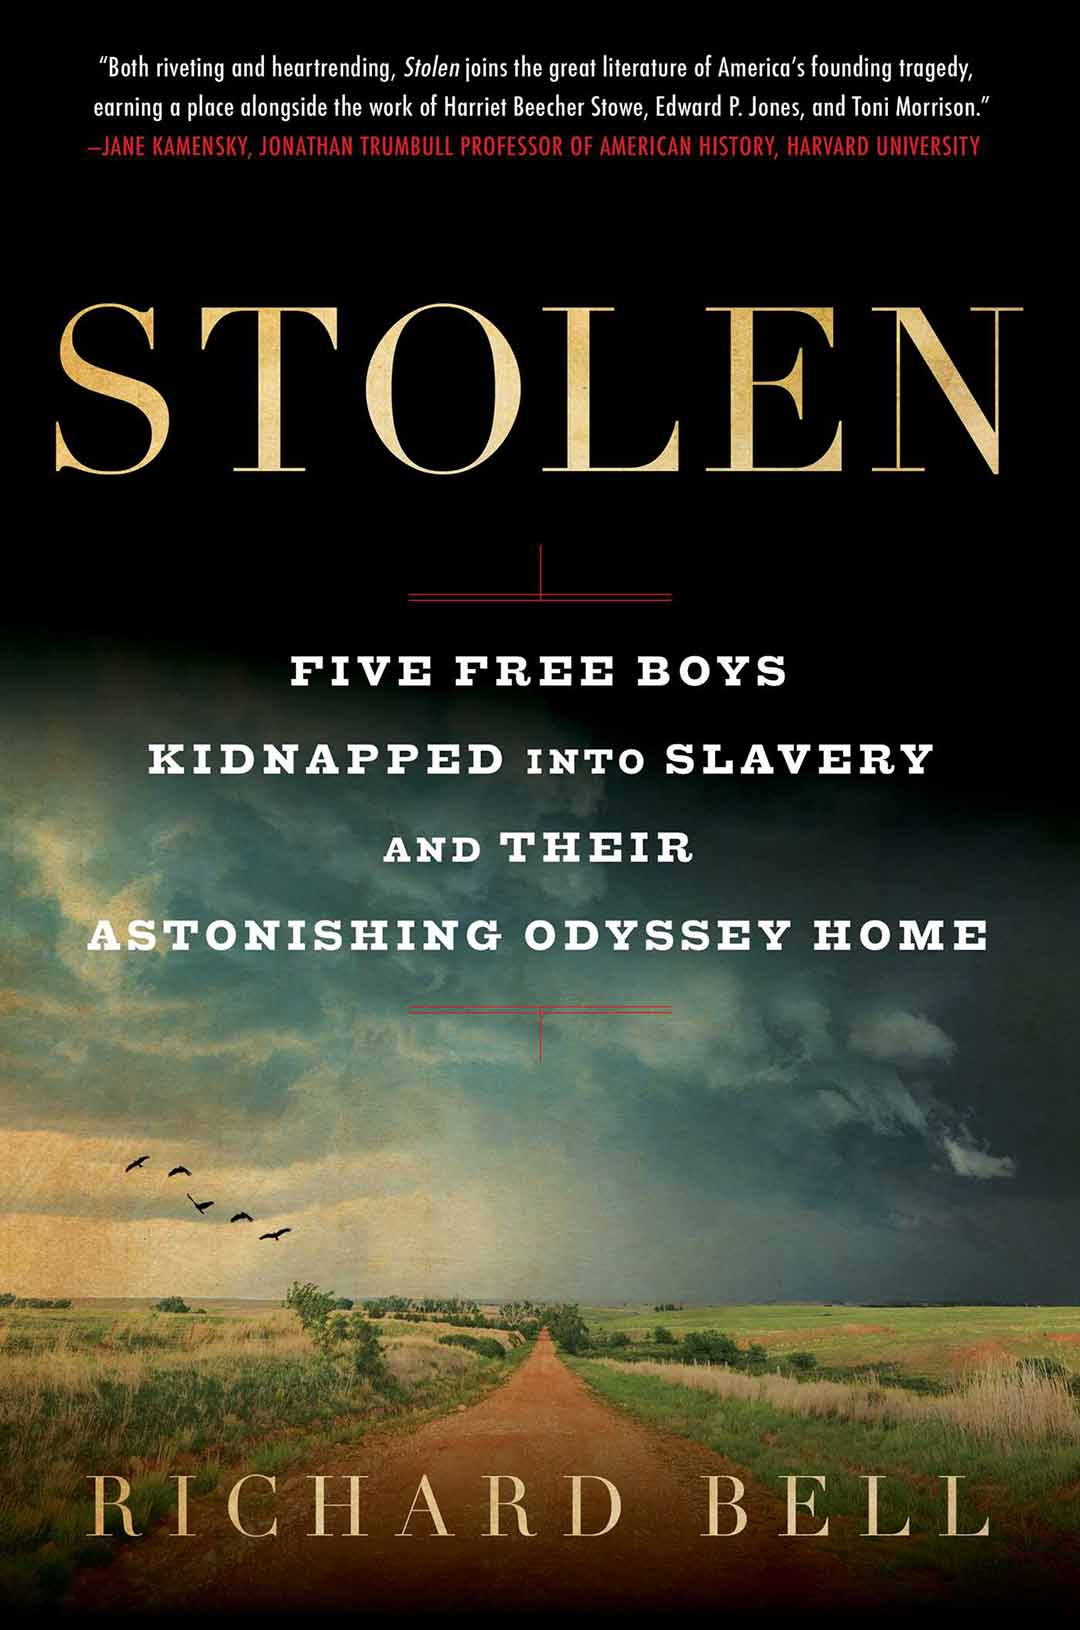 Stolen book cover that reads, "Stolen: Five Free Boys Kidnapped Into Slavery and Their Astonishing Odyssey Home. Richard Bell. Both riveting and heartrending, Stolen joins the great literature of America's founding tragedy, earning a place alongside the work of Harriet Beecher Stowe, Edward P. Jones, and Toni Morrison—Jane Kamensky, Jonathan Trumbell Professor of American History, Harvard University"